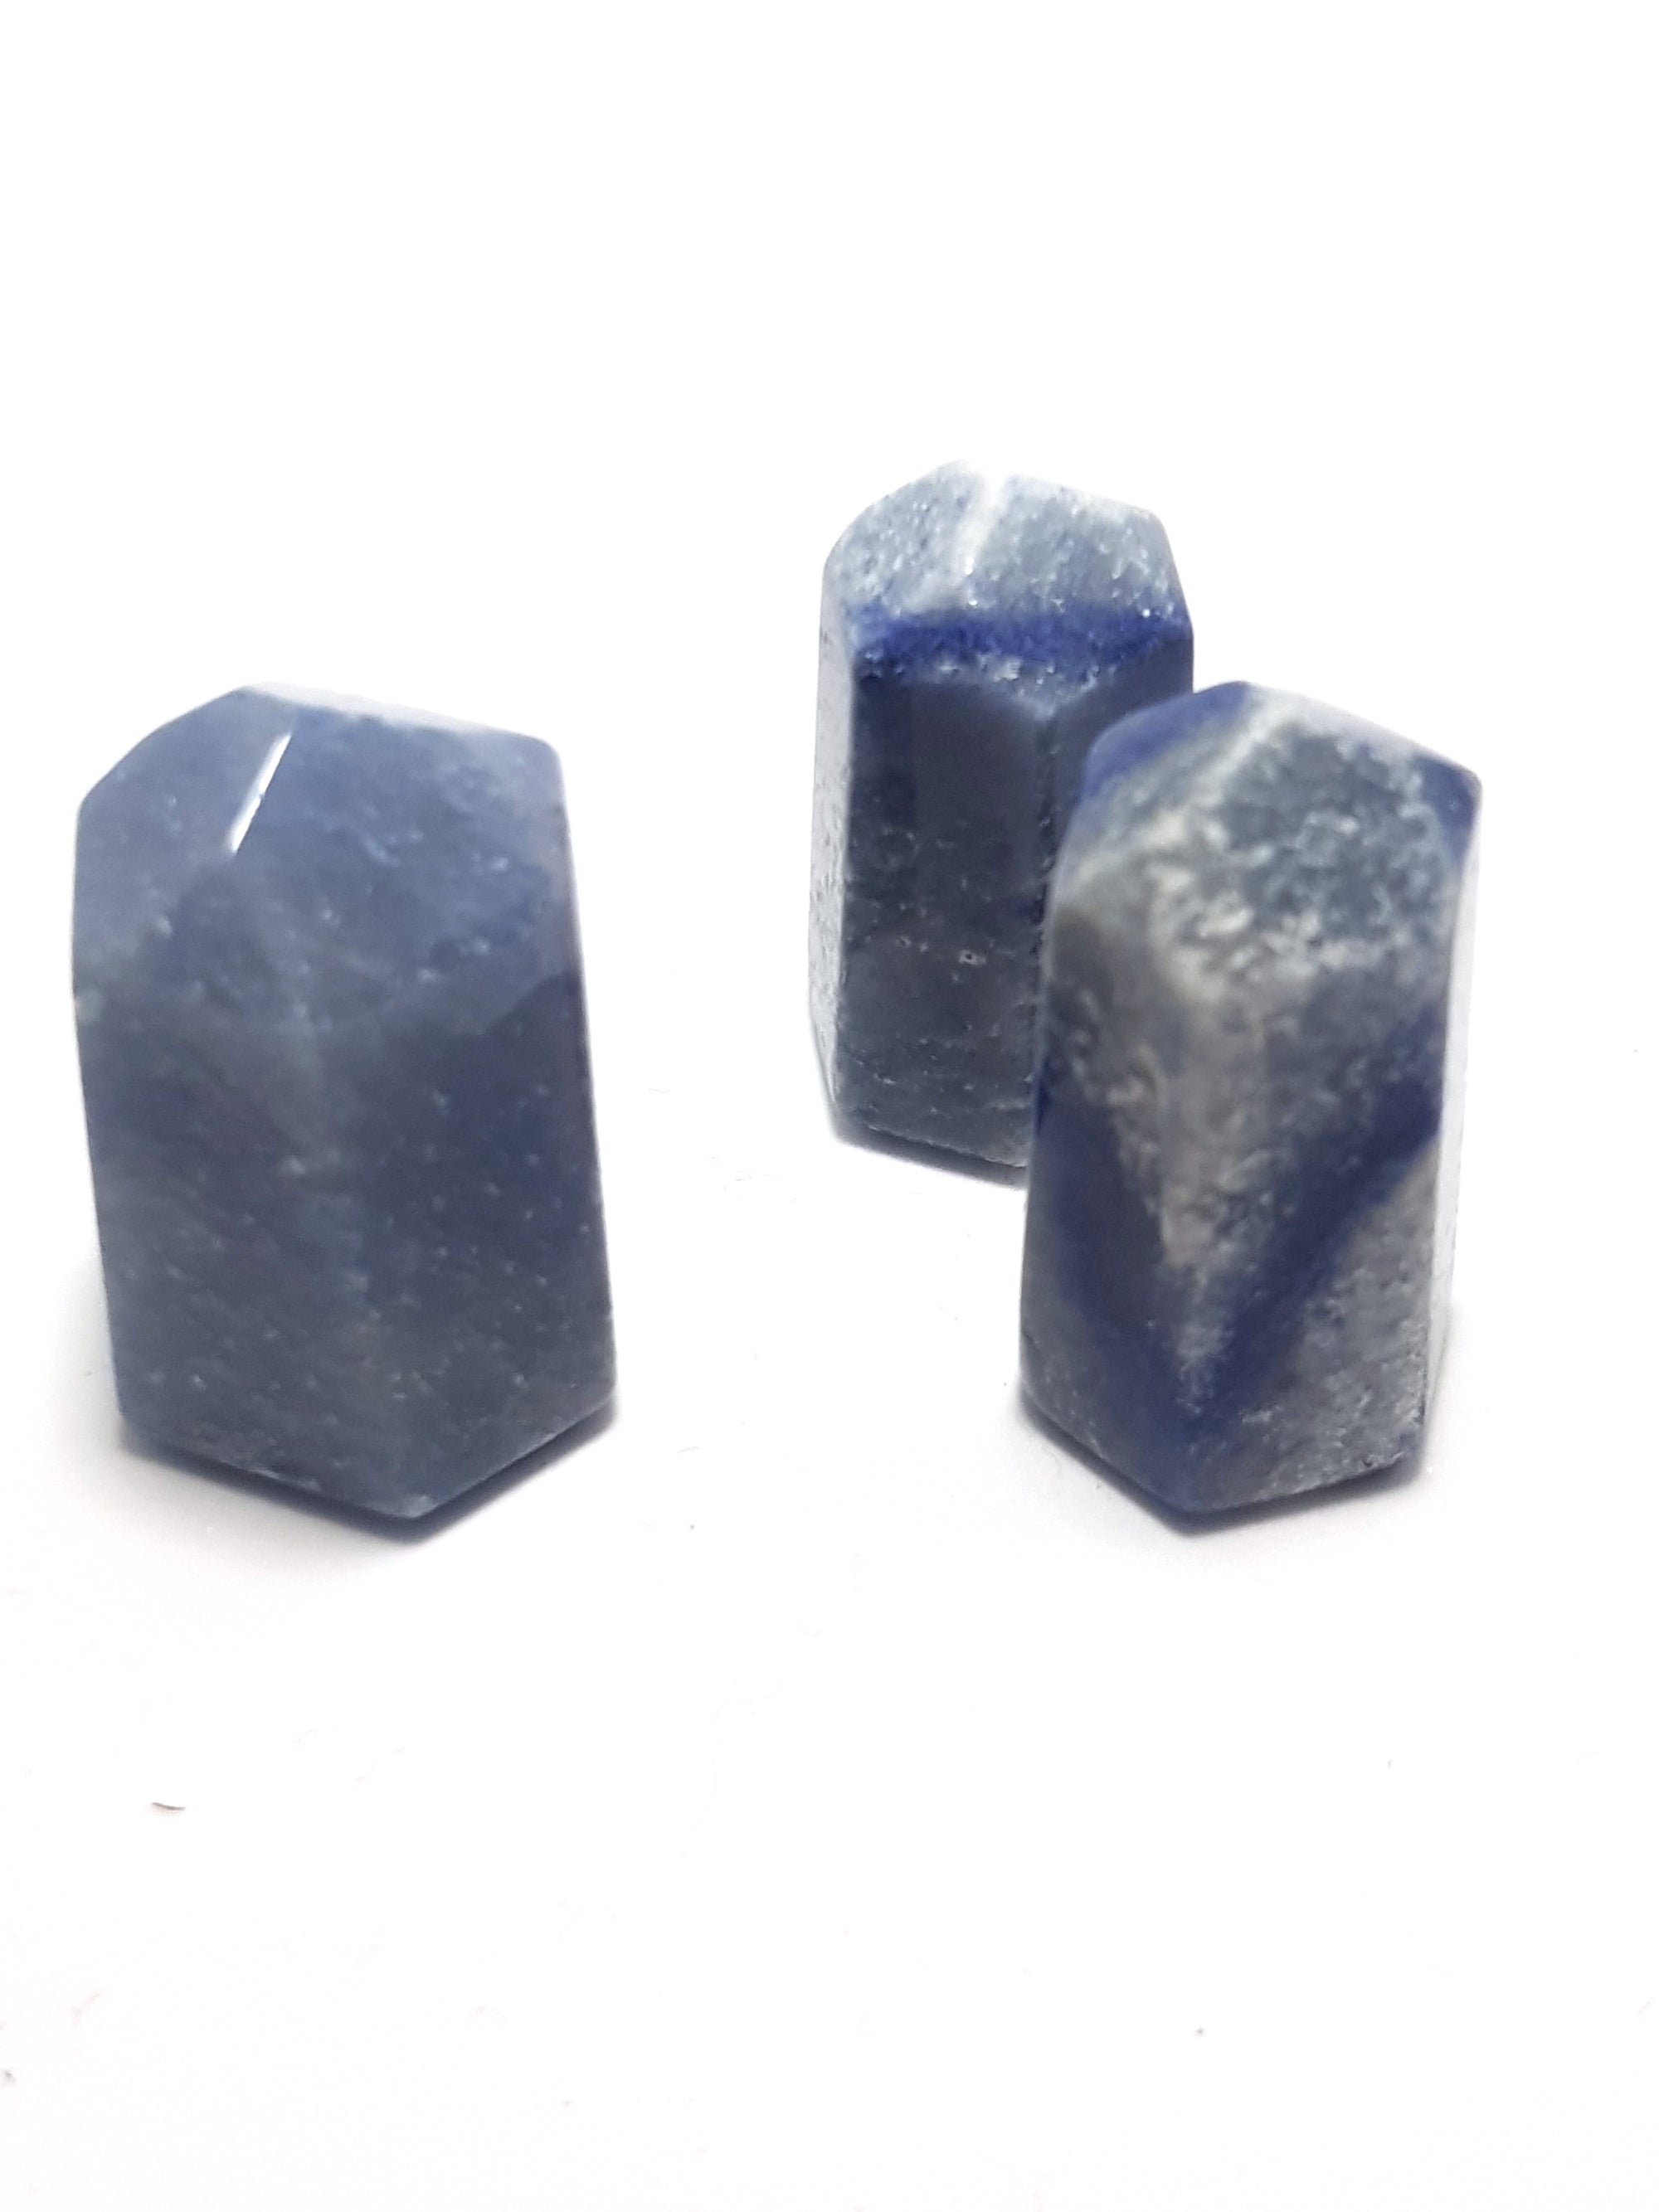 three samples of dumorterite which have been cut into six sided obelix points. The samples are grey blue- with dark blue veining